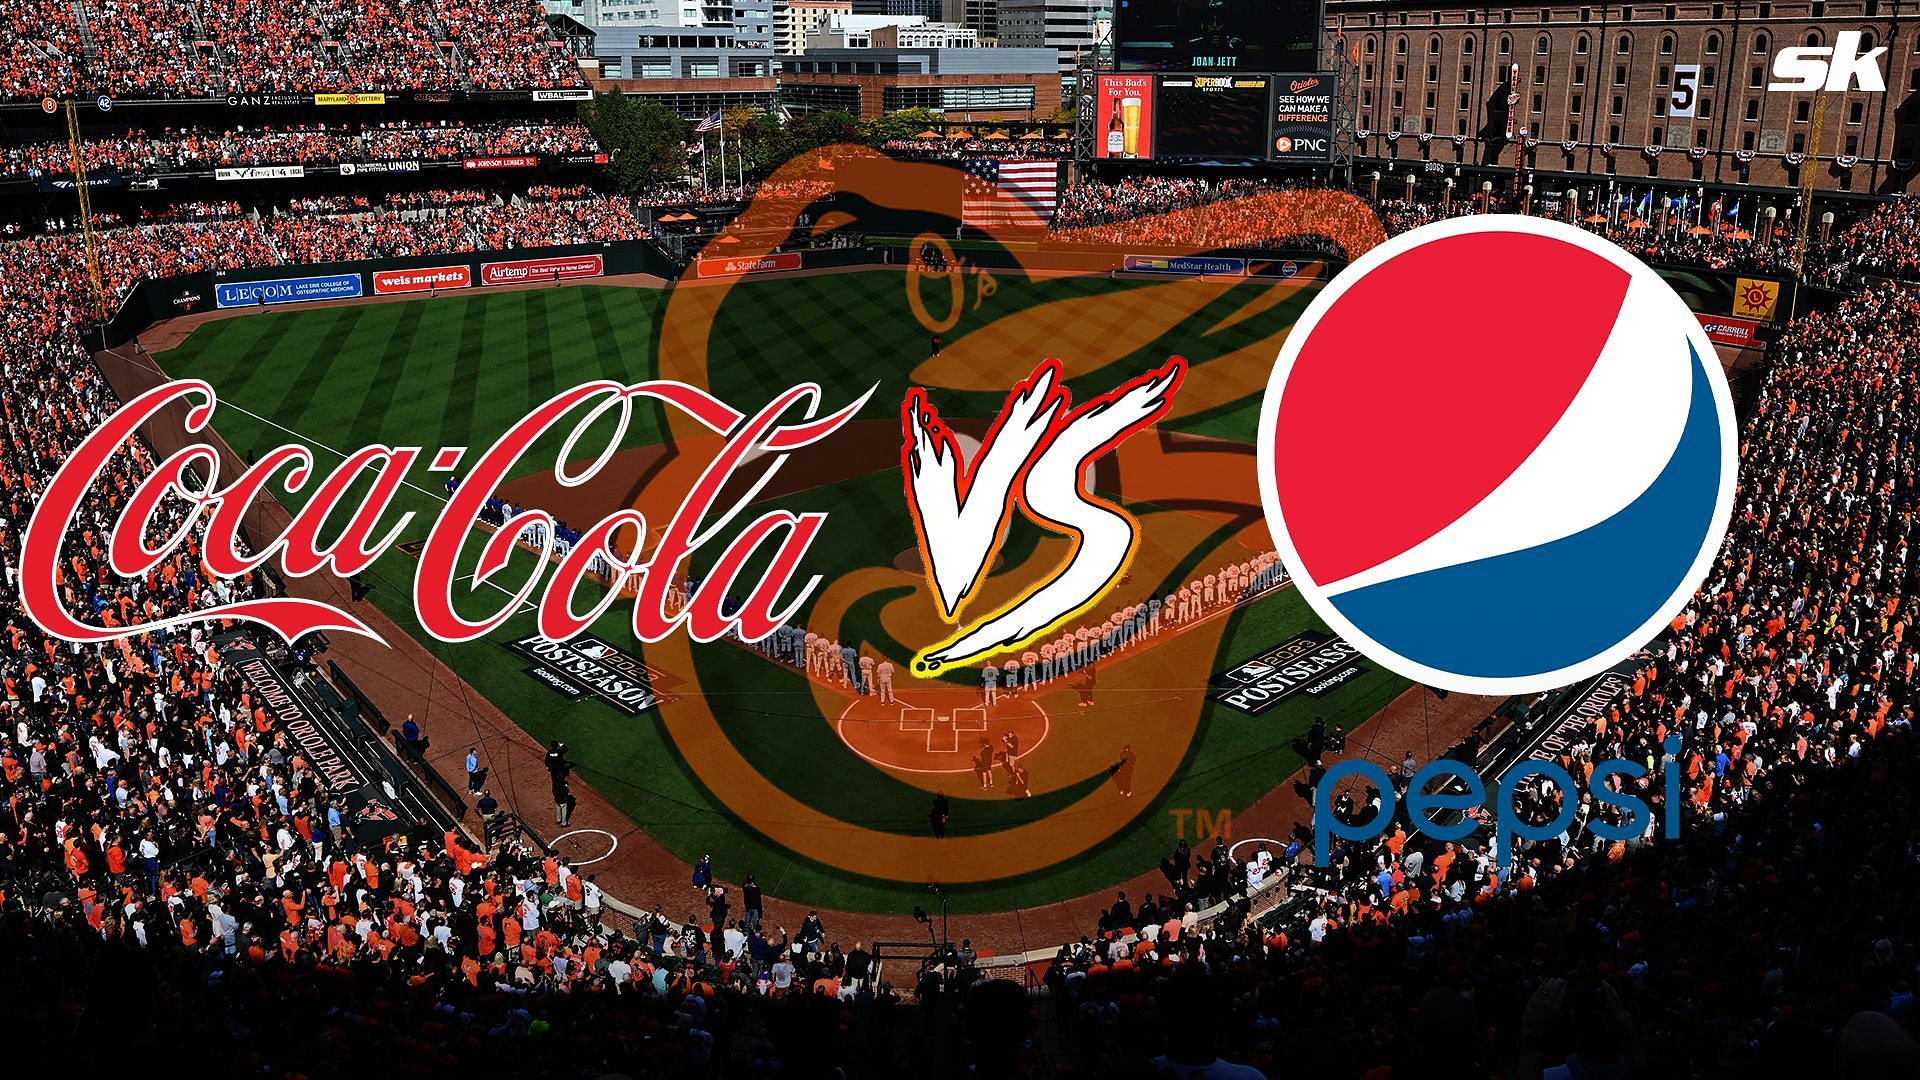 Coca Cola interested in replacing Pepsi at the Baltimore Orioles